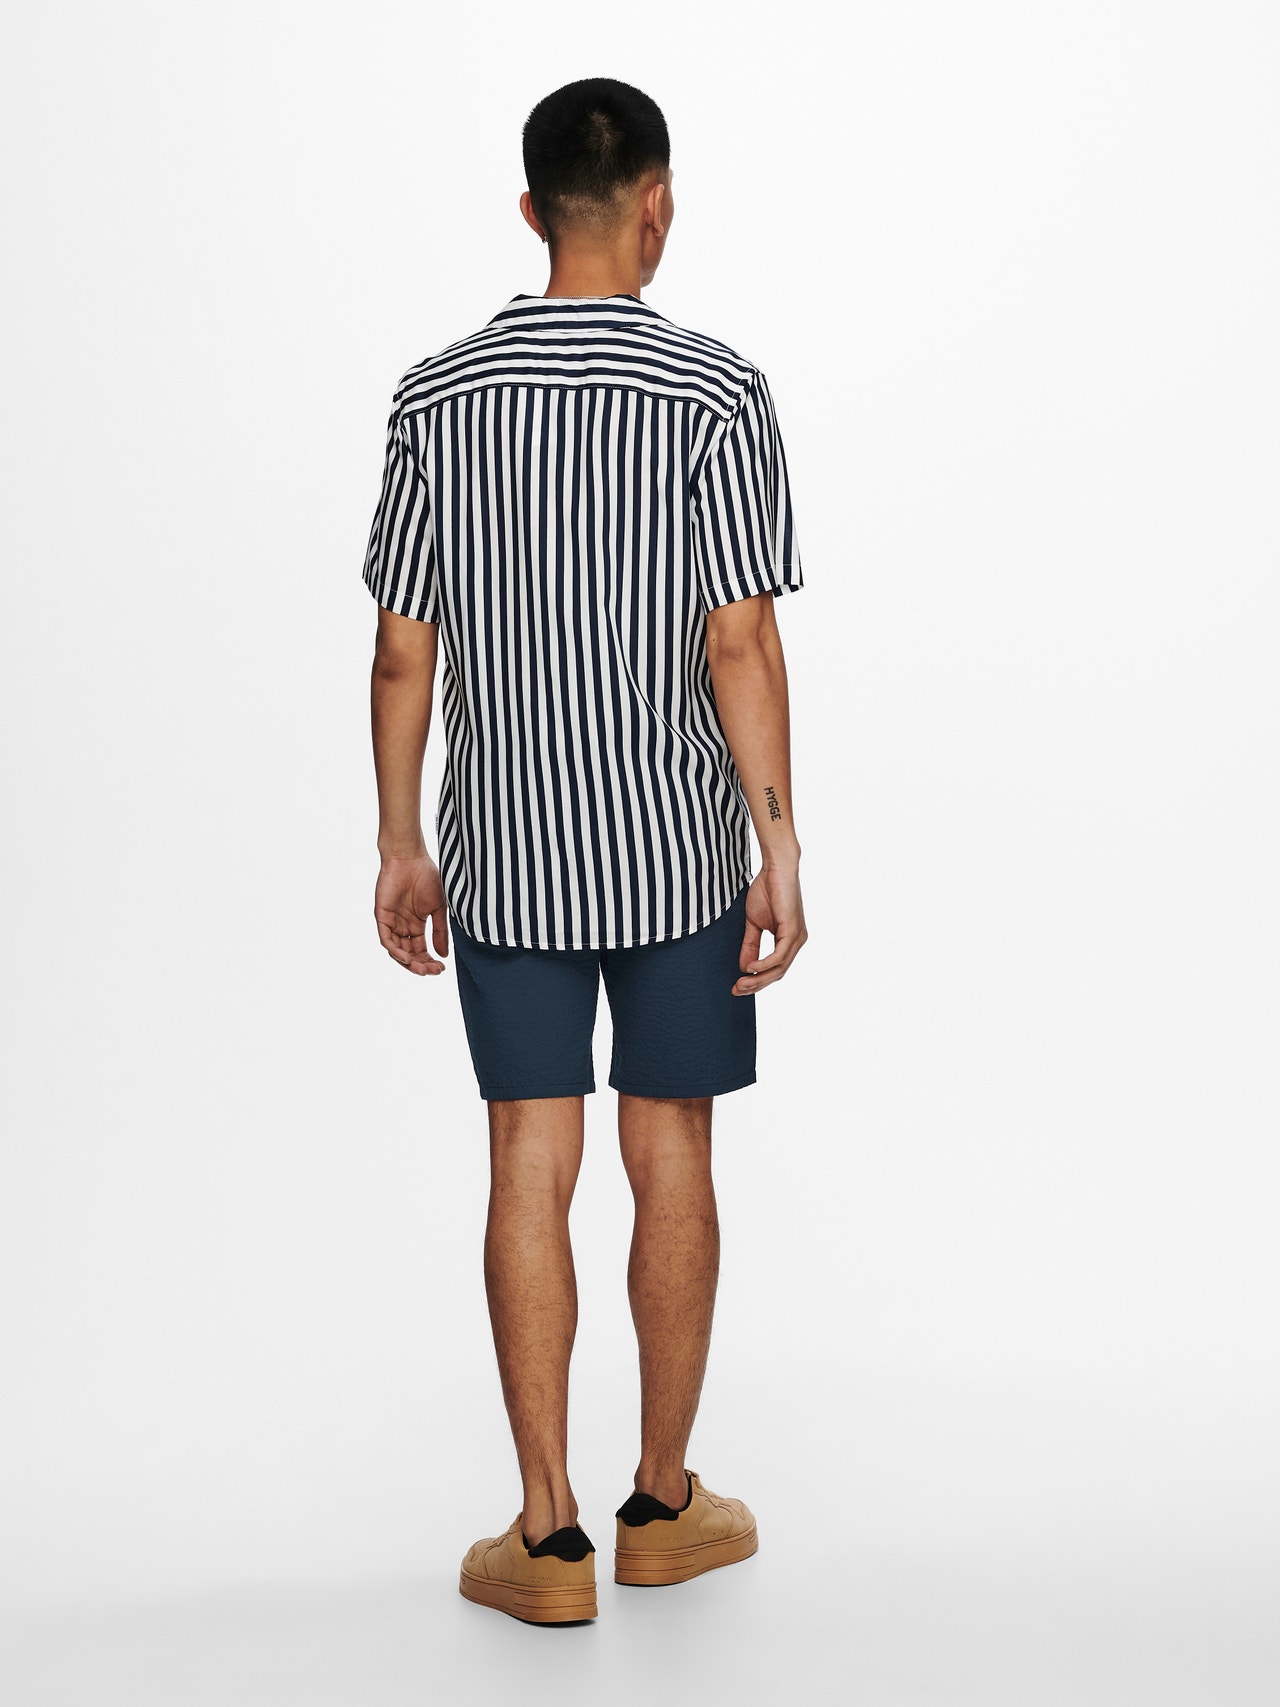 ONLY & SONS Short sleeved striped shirt -Dress Blues - 22013267